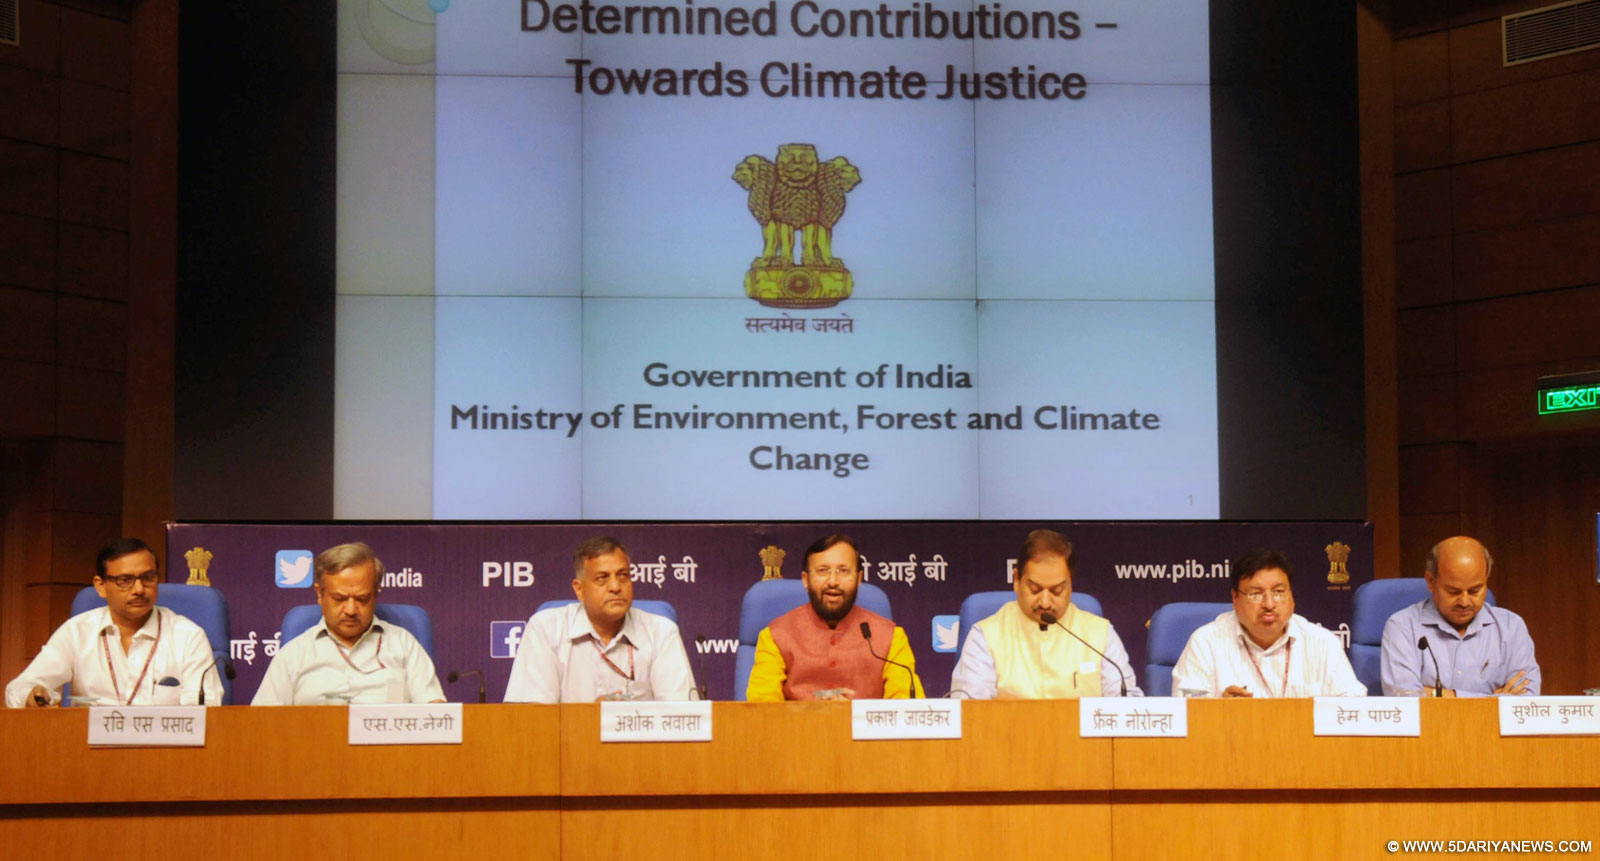 The Minister of State for Environment, Forest and Climate Change (Independent Charge), Shri Prakash Javadekar addressing a press conference on INDCs, in New Delhi on October 02, 2015. The Secretary, Ministry of Environment, Forest and Climate Change, Shri Ashok Lavasa, the Director General (M&C), Press Information Bureau, Shri A.P. Frank Noronha and other dignitaries are also seen.